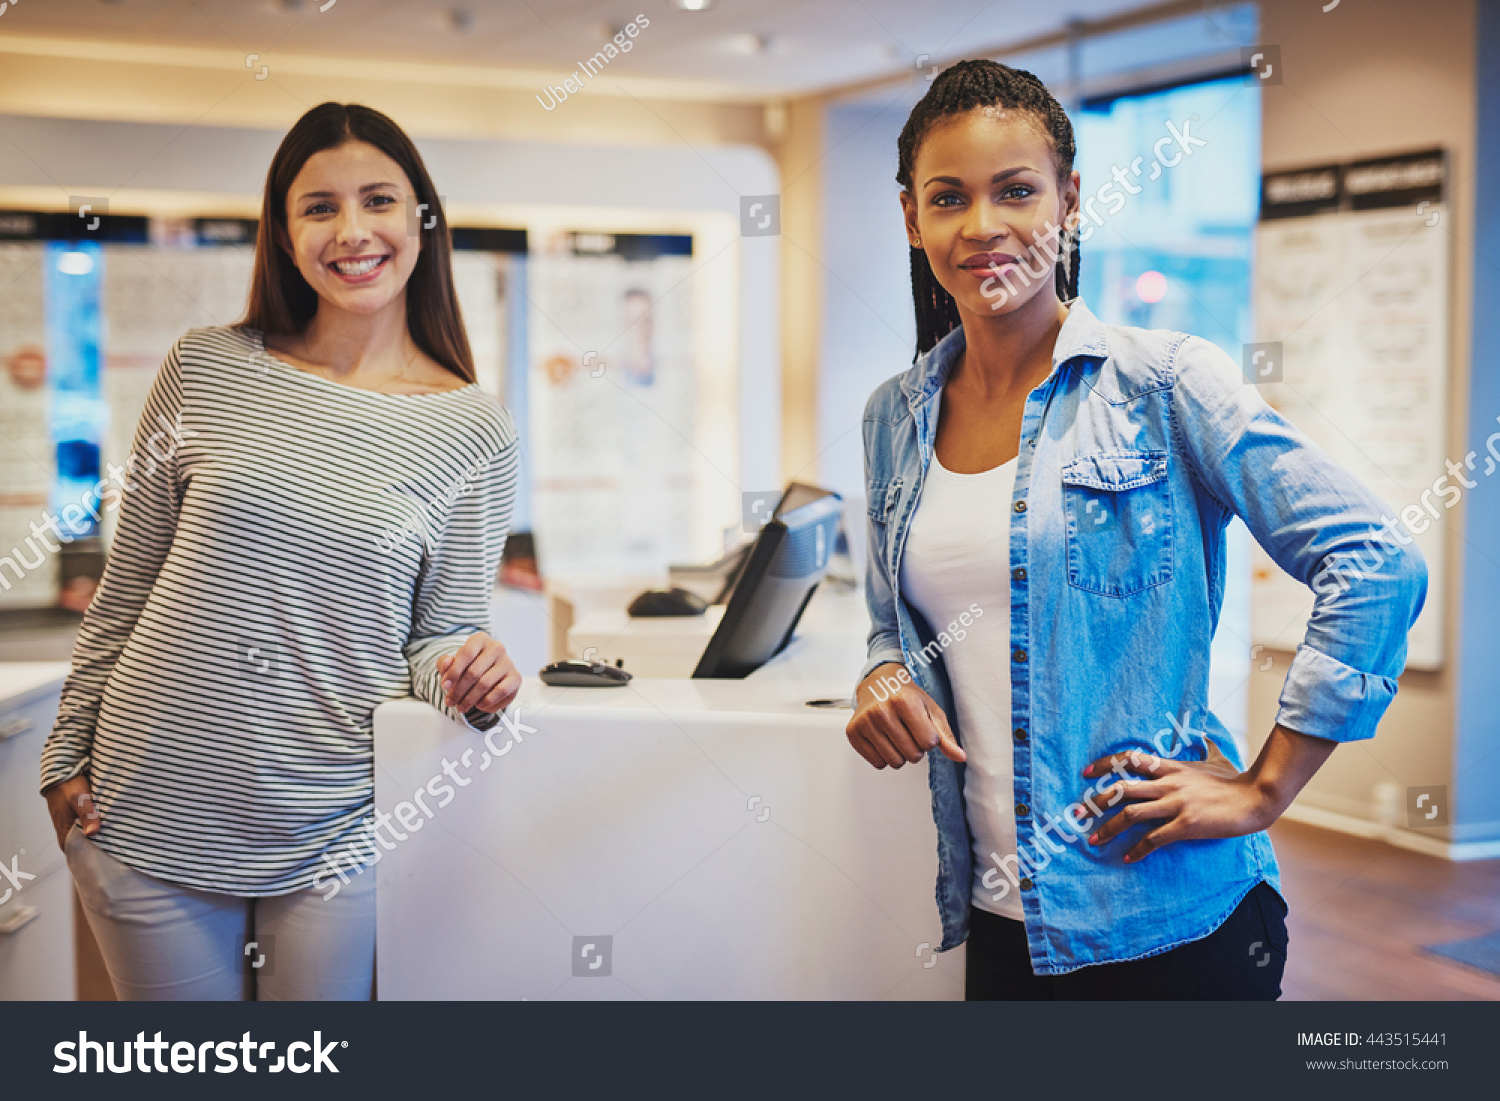 Smiling diverse girl friends wearing striped blouse and blue jean shirt stand against counter in optical shop #443515441